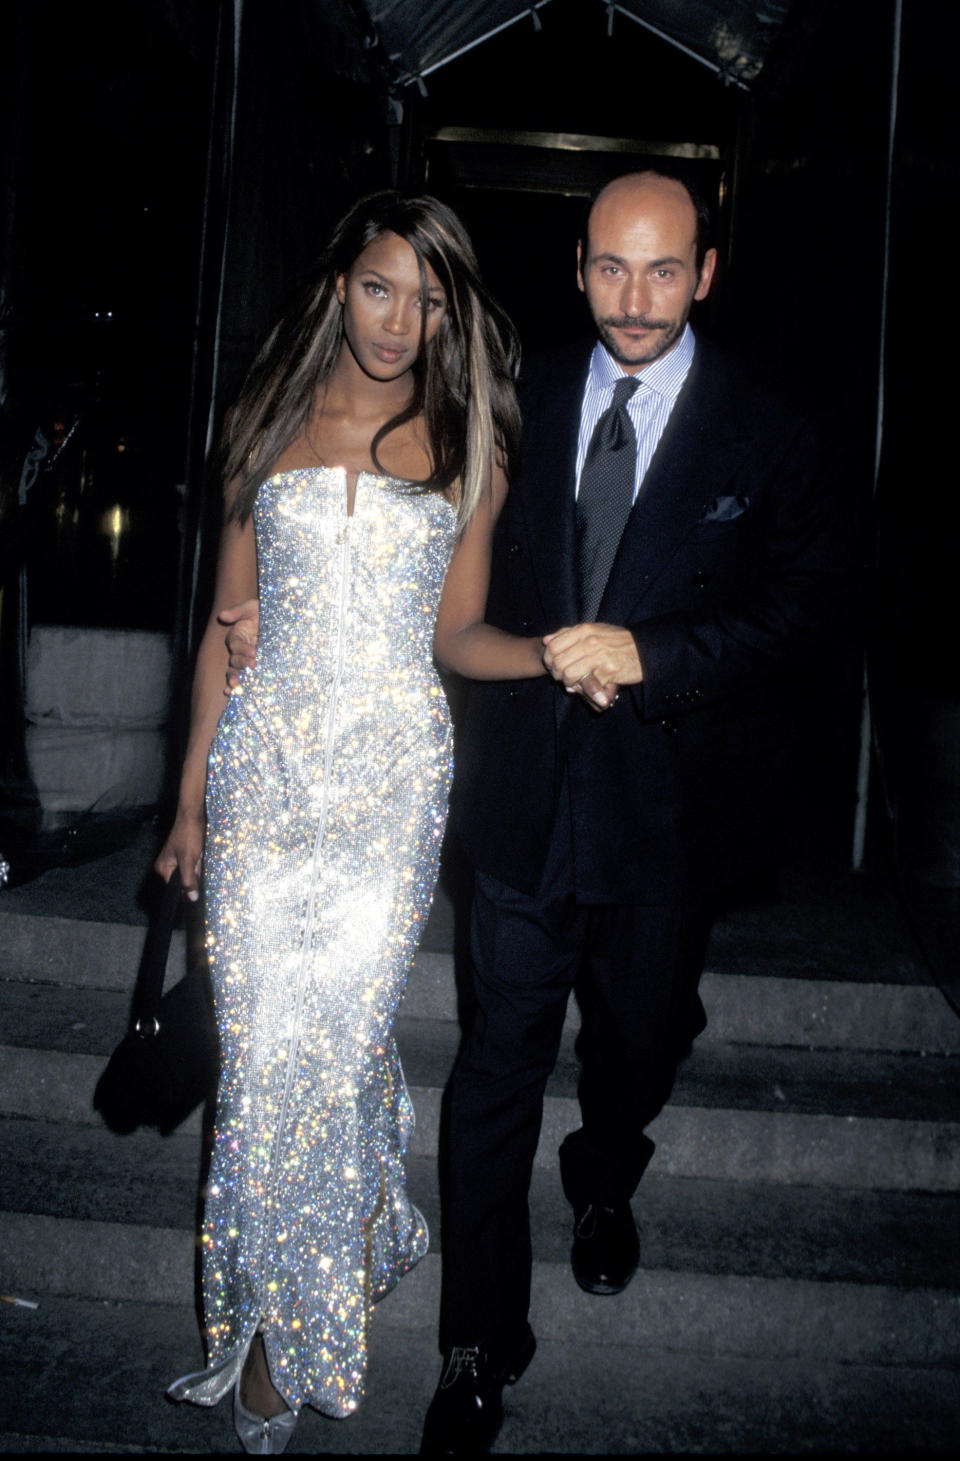 Naomi Campbell and guest during 1995 Costume Institute Gala at Metropolitan Museum of Art in New York City, New York, United States. / Credit: Ron Galella, Ltd./Ron Galella Collection via Getty Images